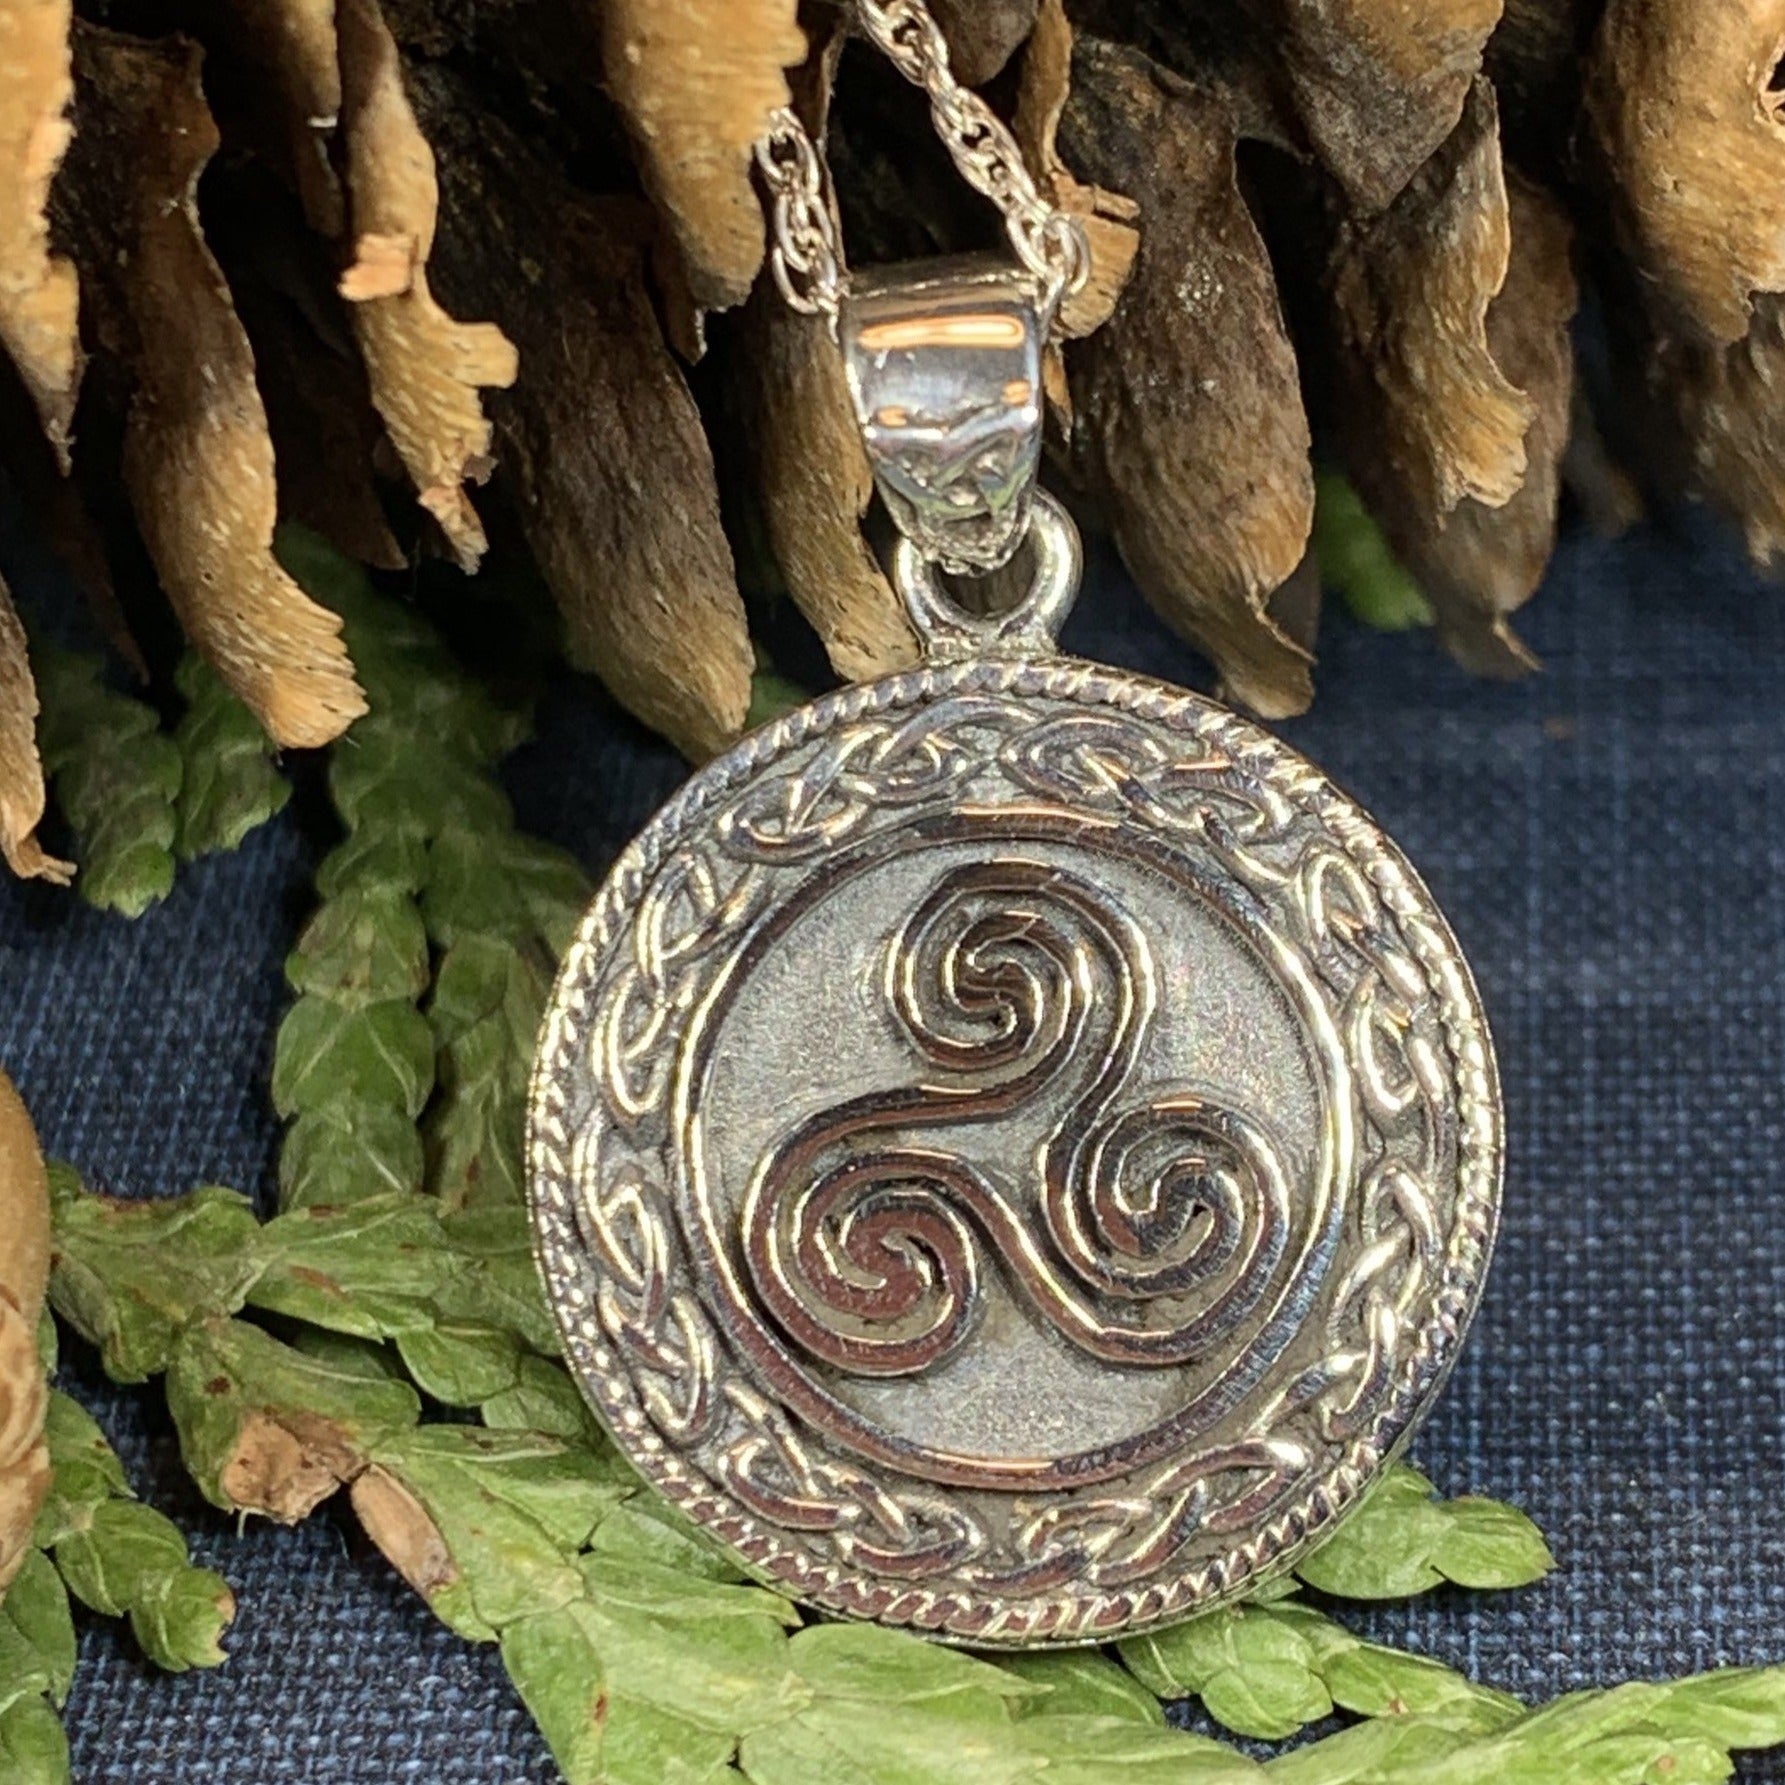 Celtic Spiral Pendant Symbol of New Beginning Prosperity Grouth Energy  Eternity Carved Stone Necklace Charm Jewellery Handmade by Myself 